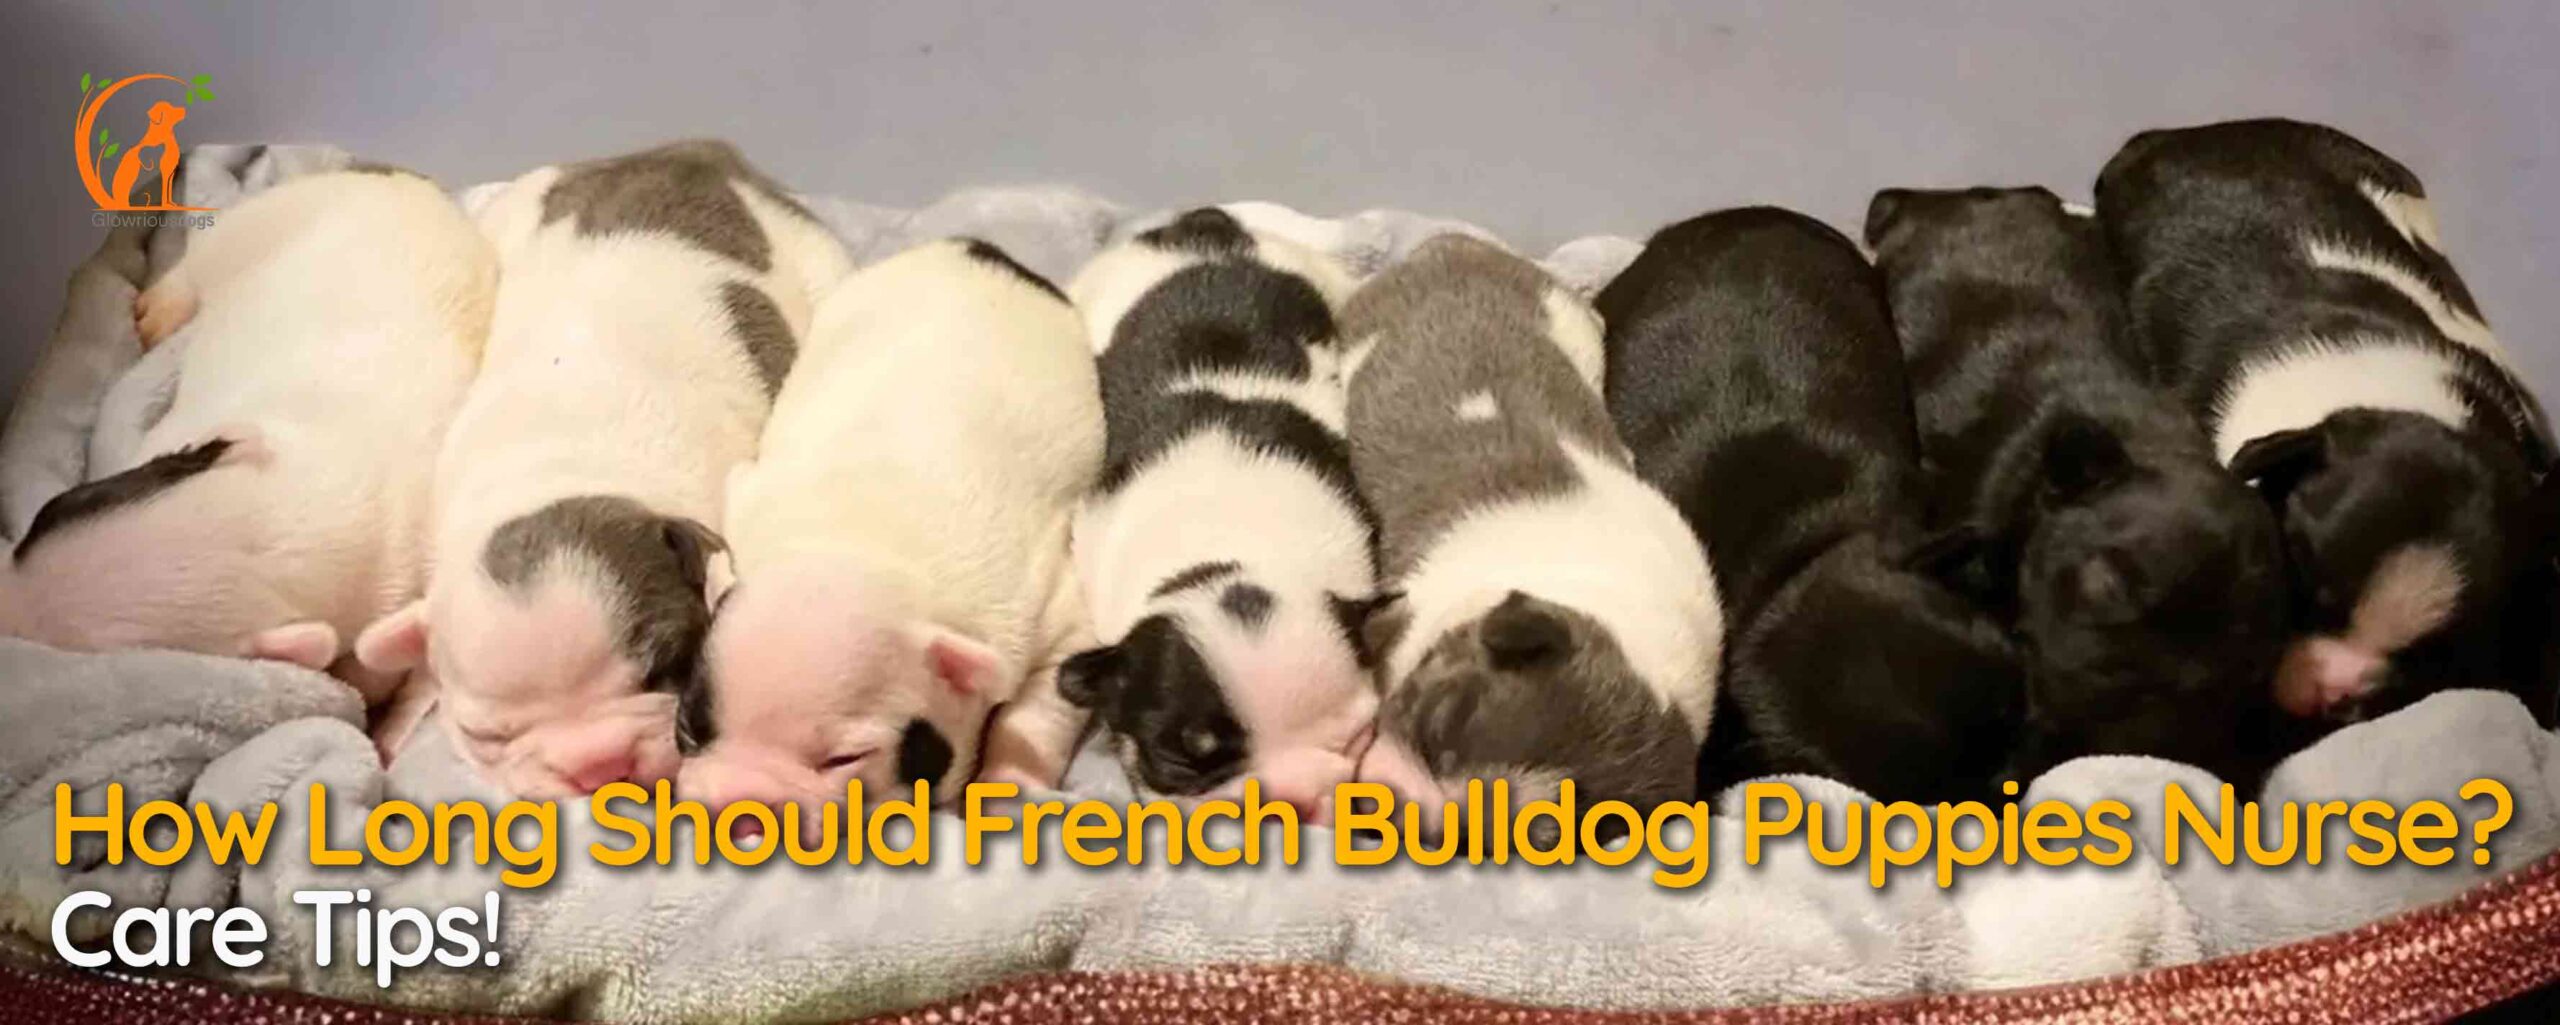 How Long Should French Bulldog Puppies Nurse? Care Tips!